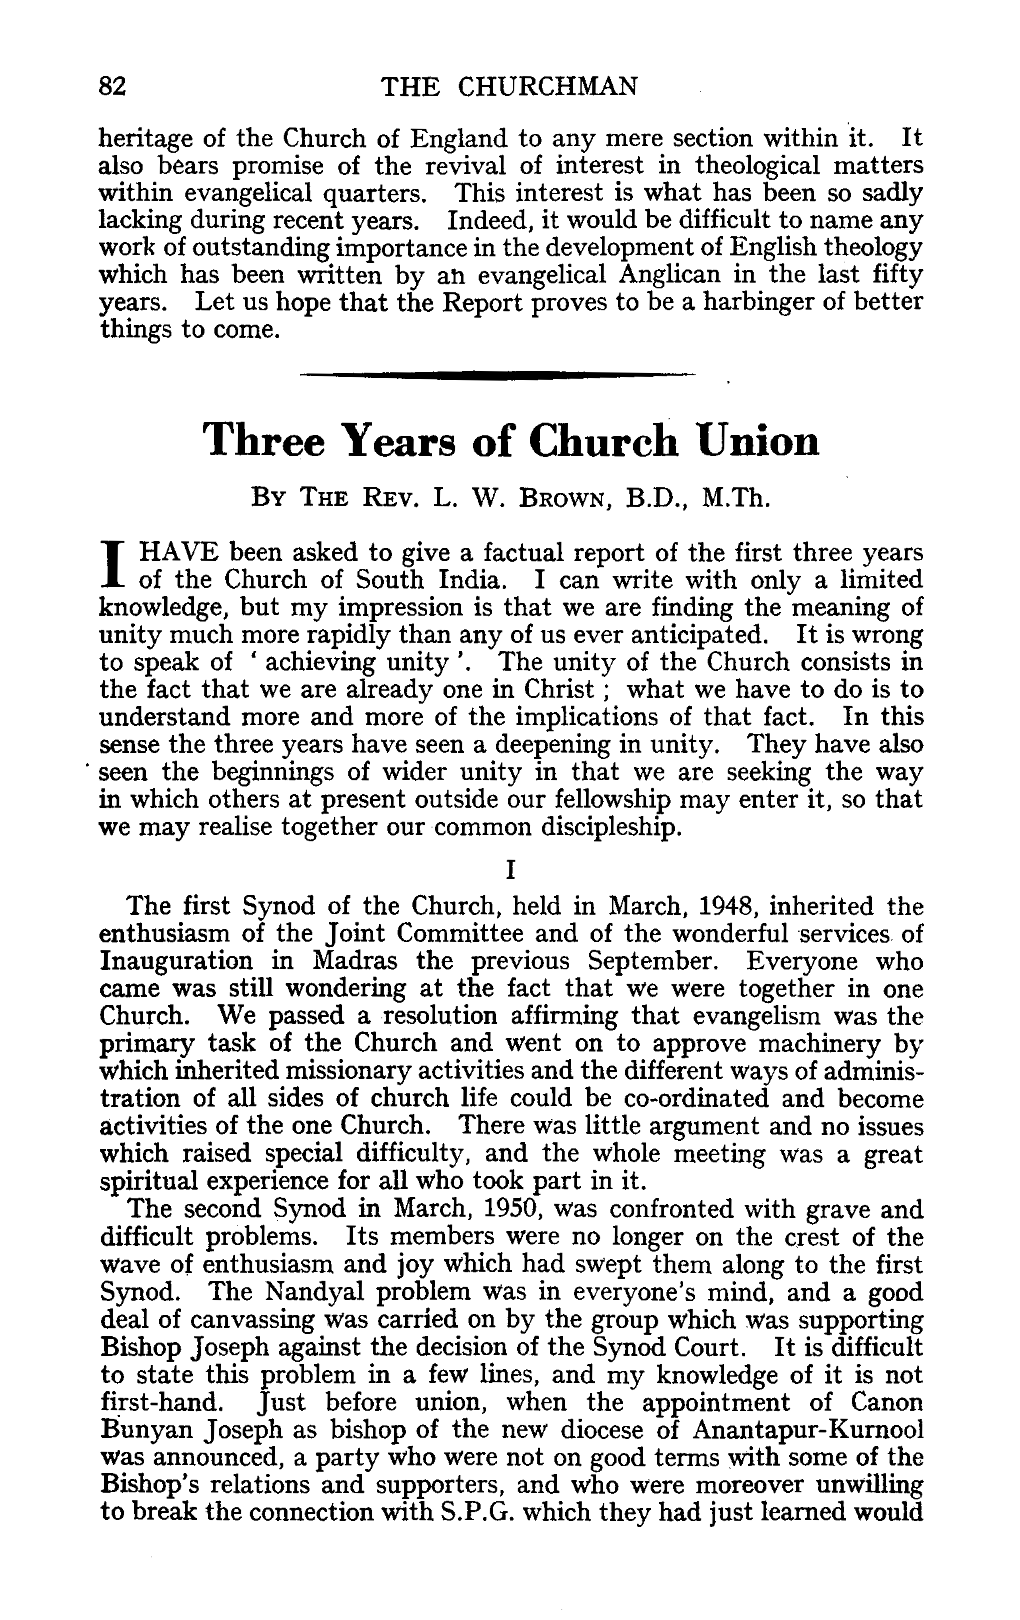 Three Years of Church Union by the REV